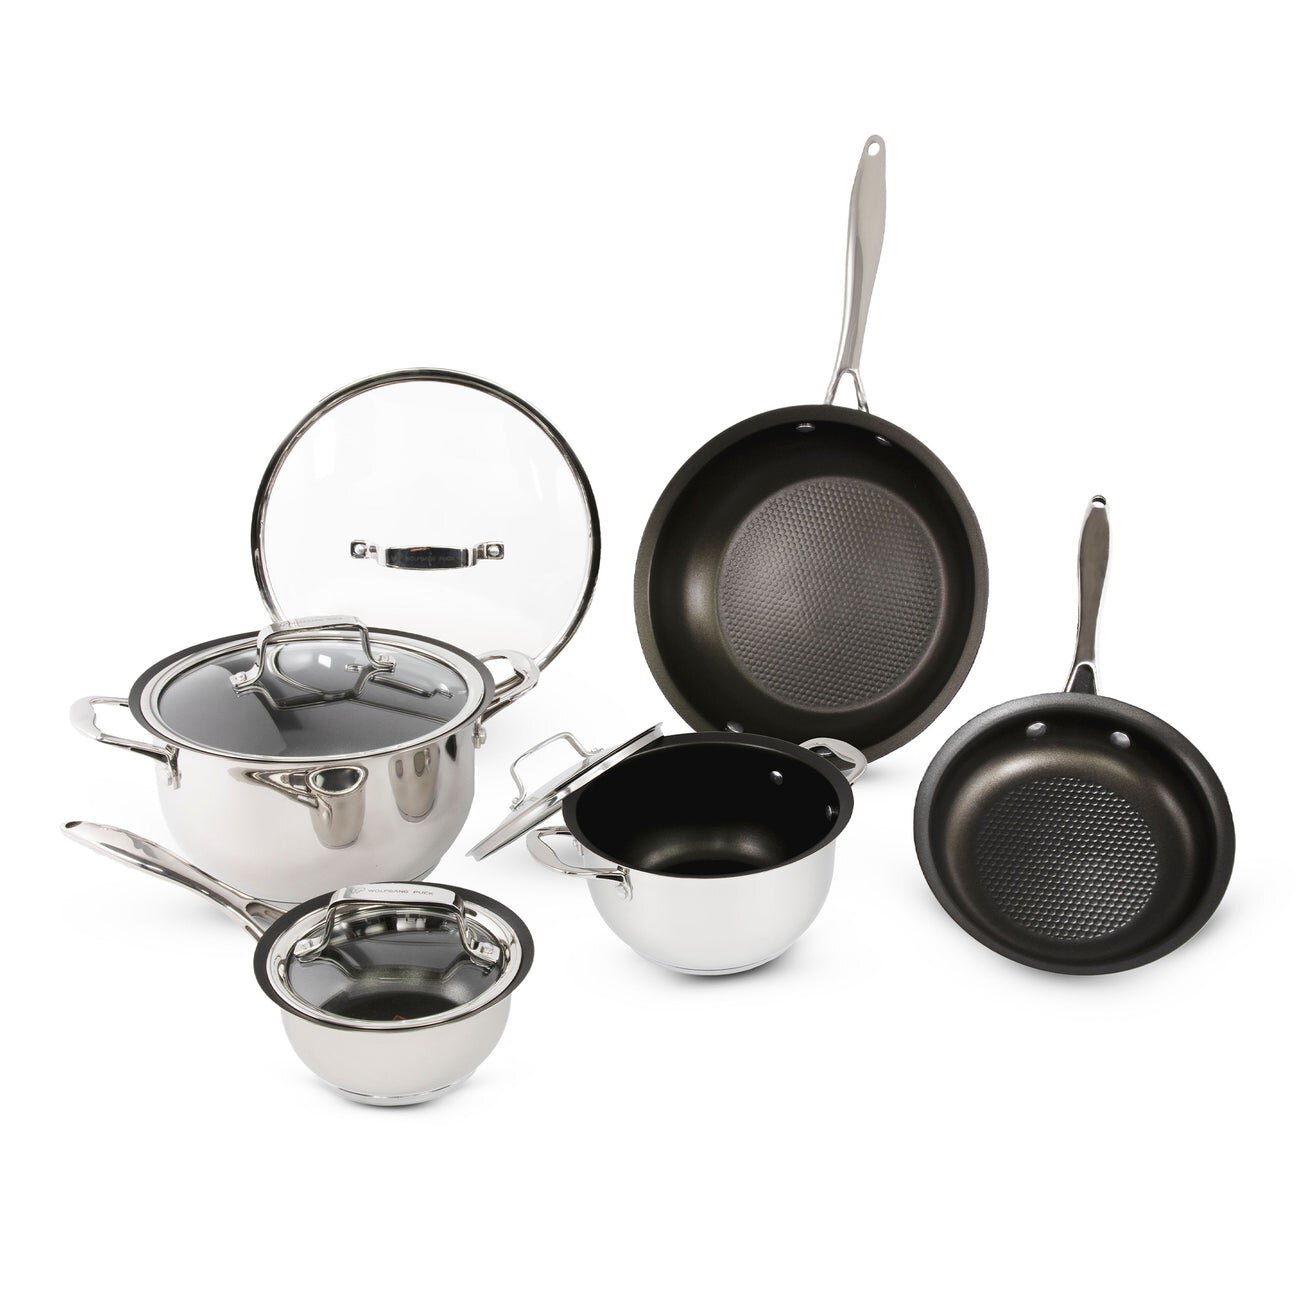 Wolfgang Puck 10 Stainless Steel Skillet Open Box